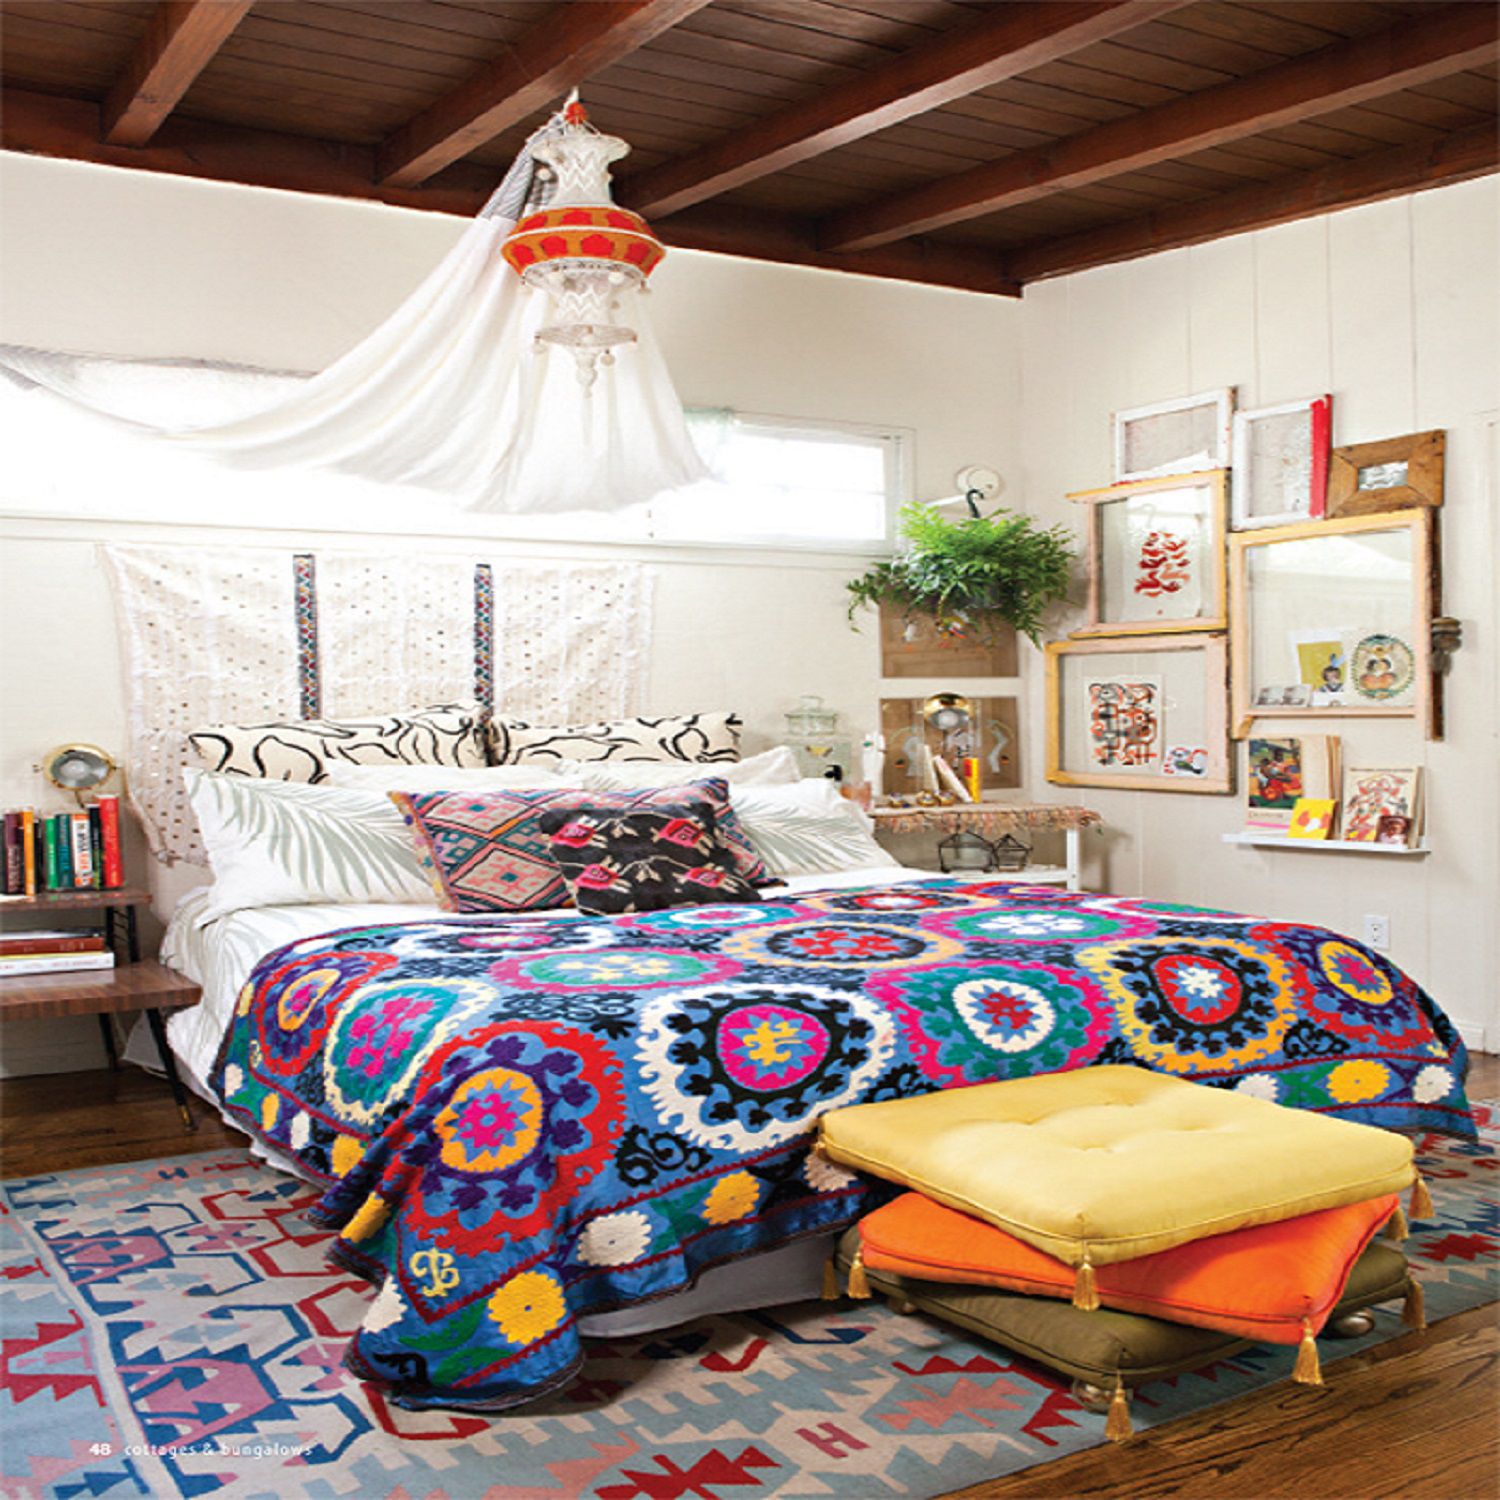 New Hippie Style Bedroom Ideas for Simple Design